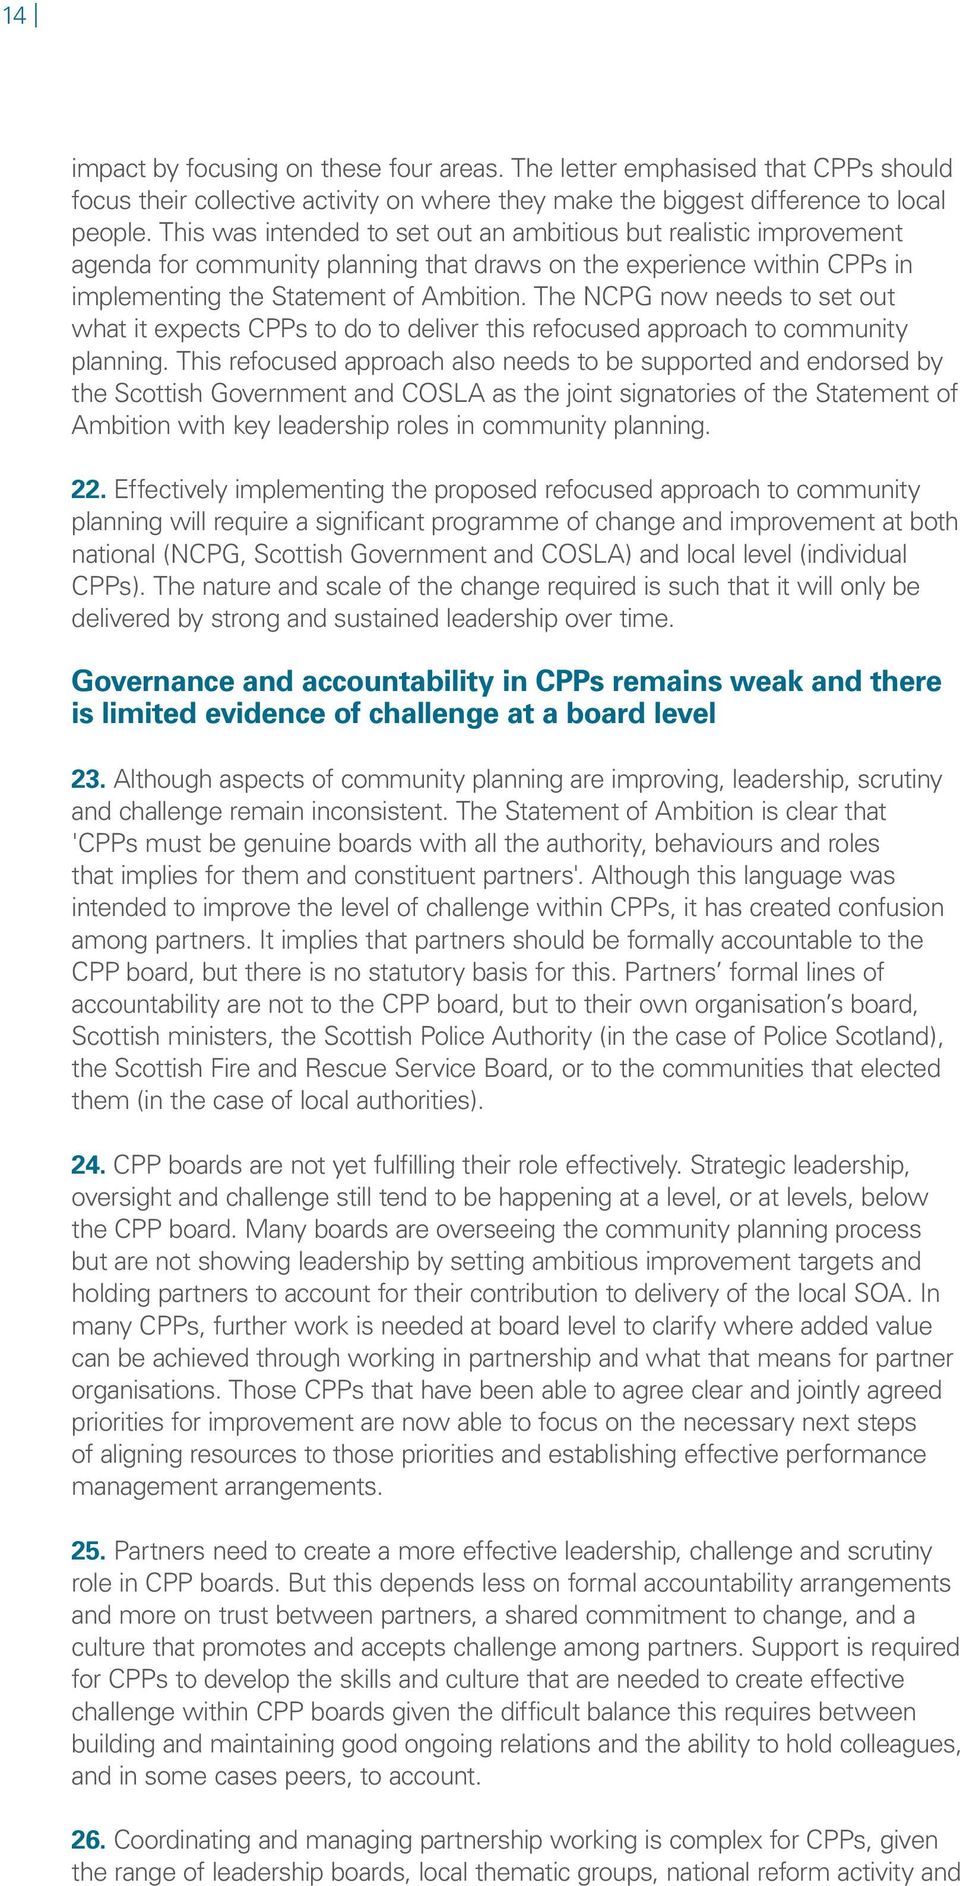 The NCPG now needs to set out what it expects CPPs to do to deliver this refocused approach to community planning.